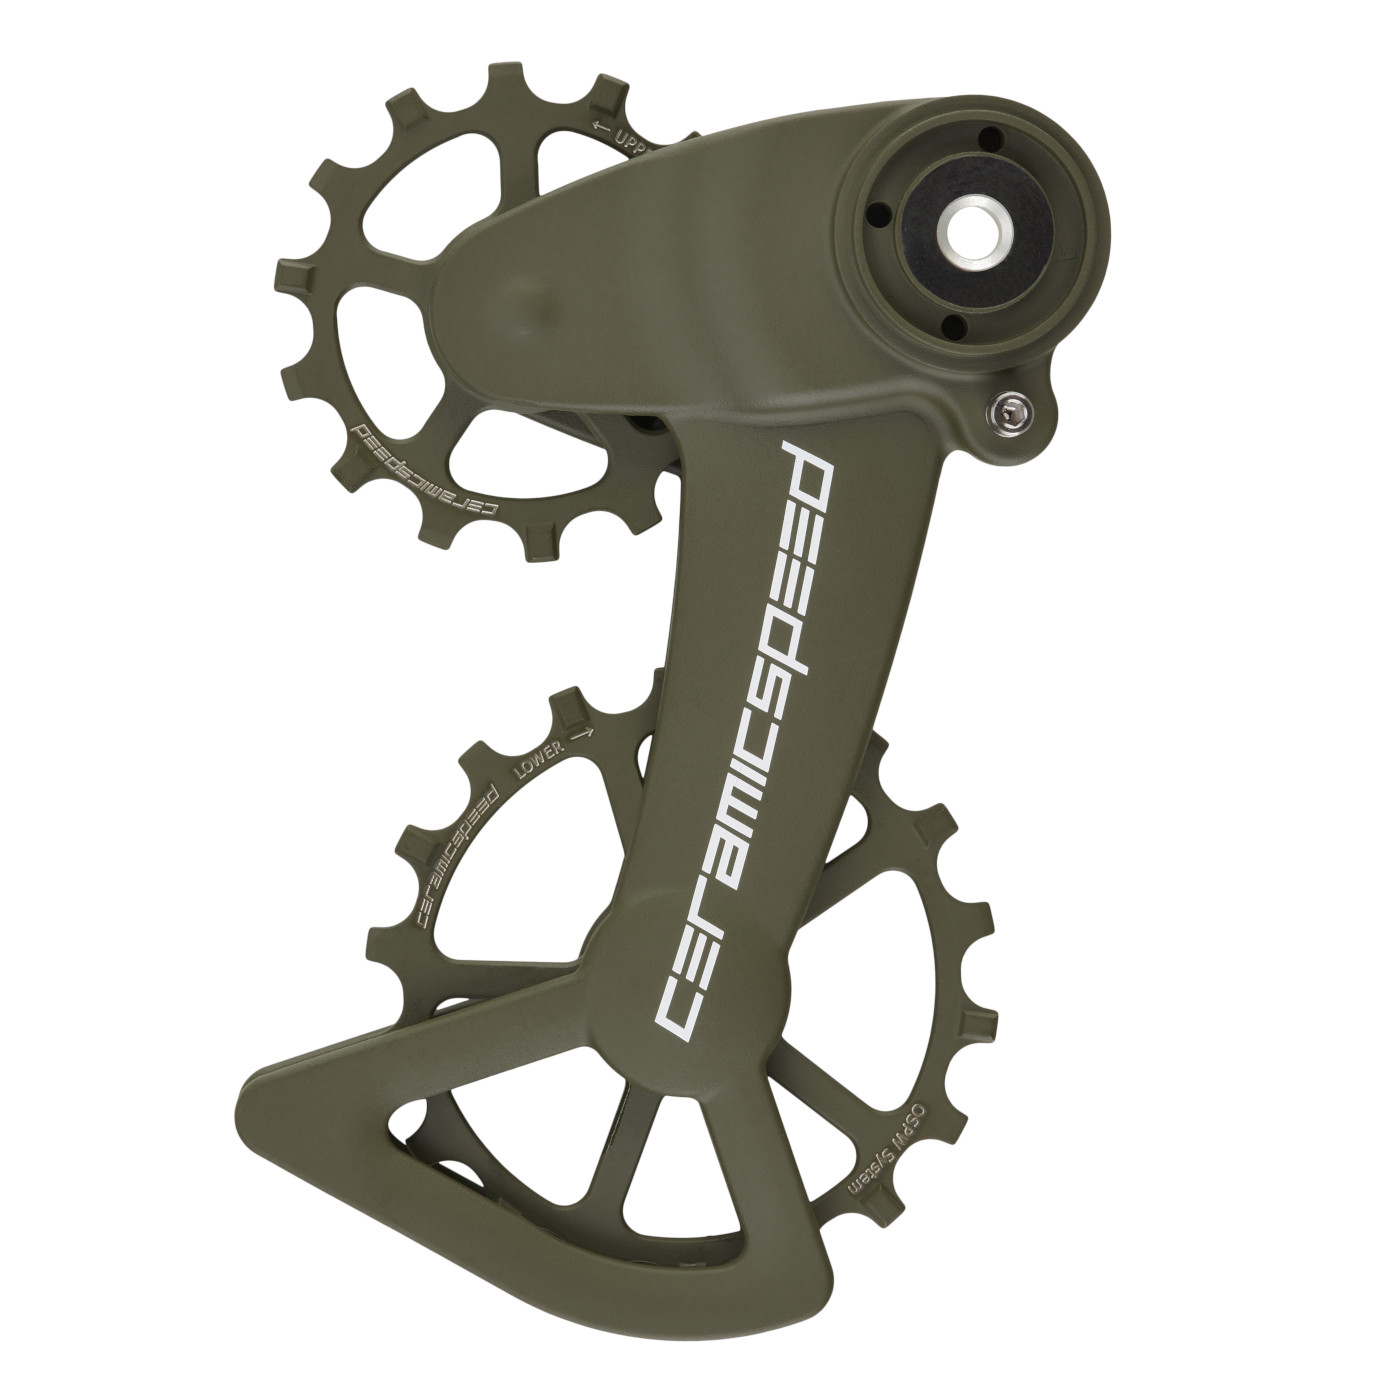 Picture of CeramicSpeed Limited Edition Cerakote OSPW X Derailleur Pulley System - for SRAM Eagle AXS | 14/18 Teeth | Coated Bearings - olive